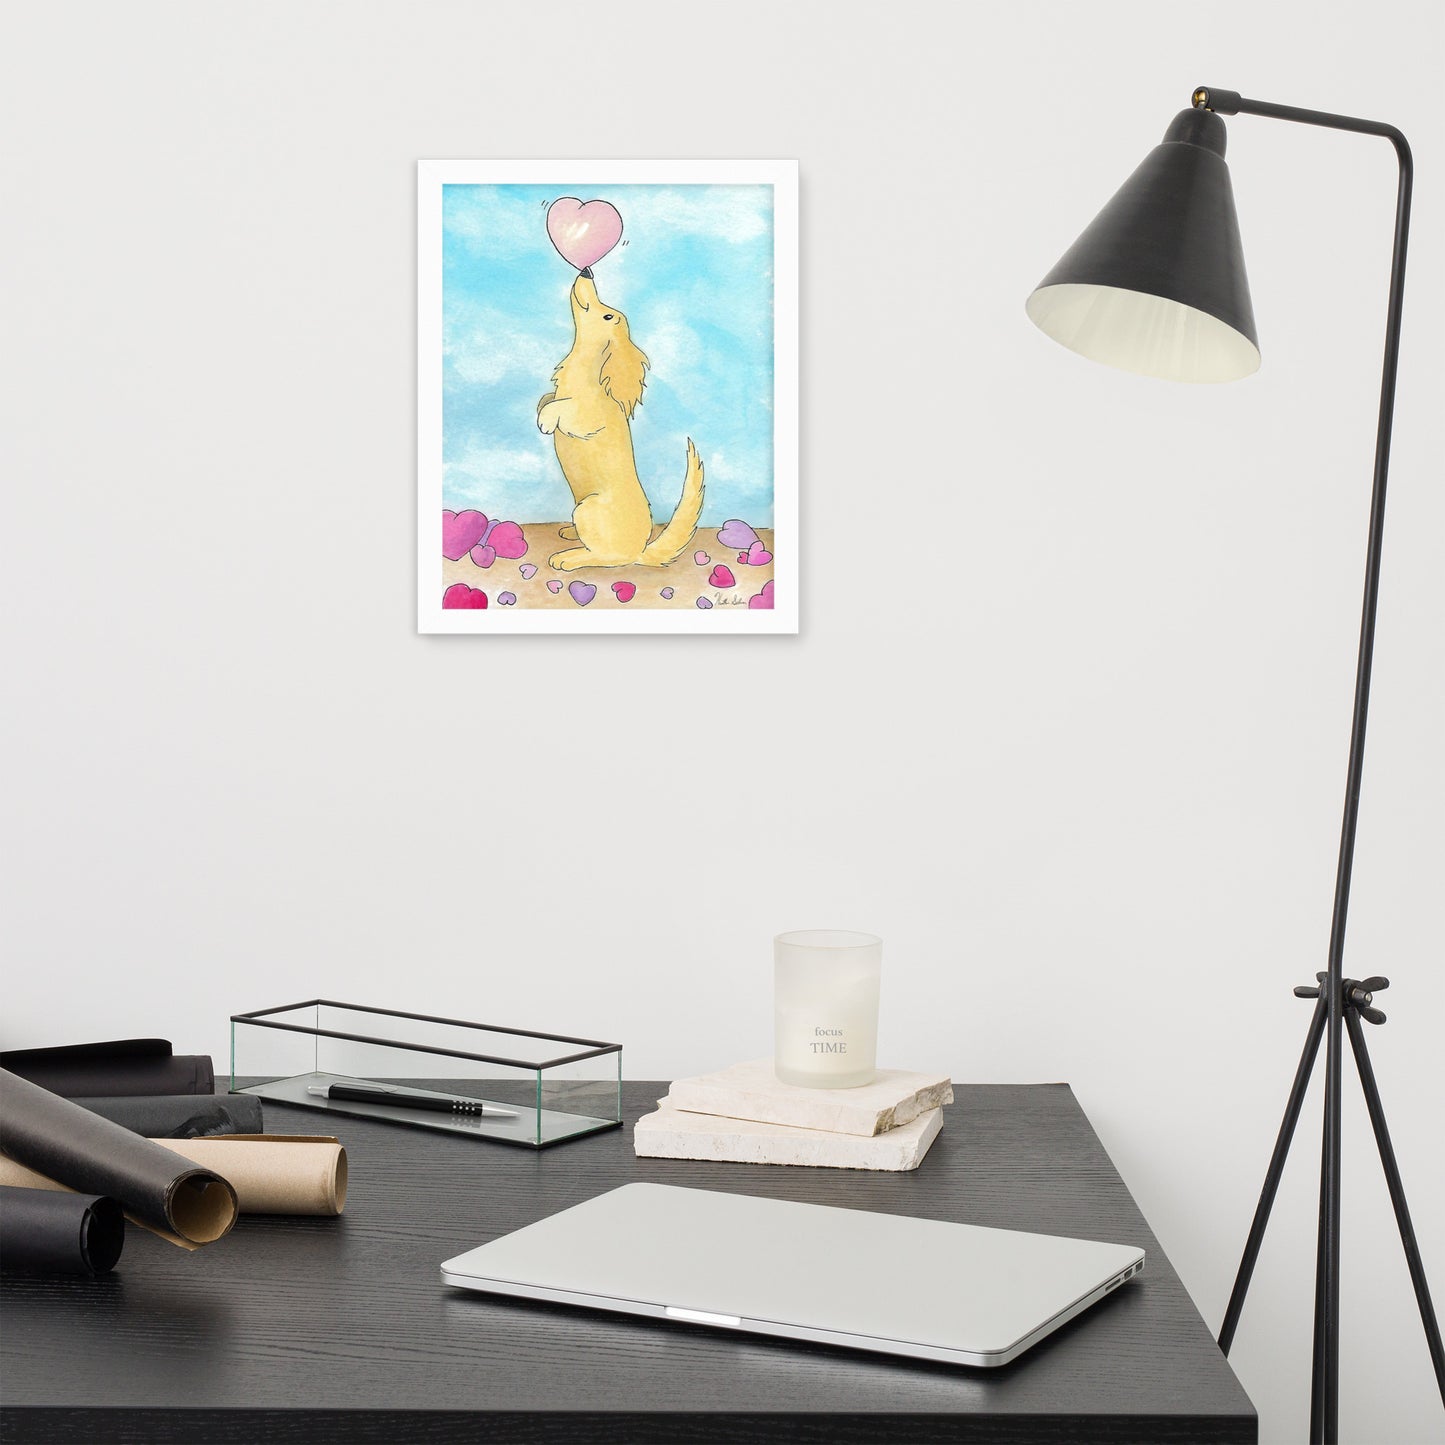 Framed watercolor art print entitled Puppy Love.  11 by 14 inch print in white ayous wood frame. Has acrylite cover to protect the art print. Hanging hardware included. Shown on wall above desk and lamp.